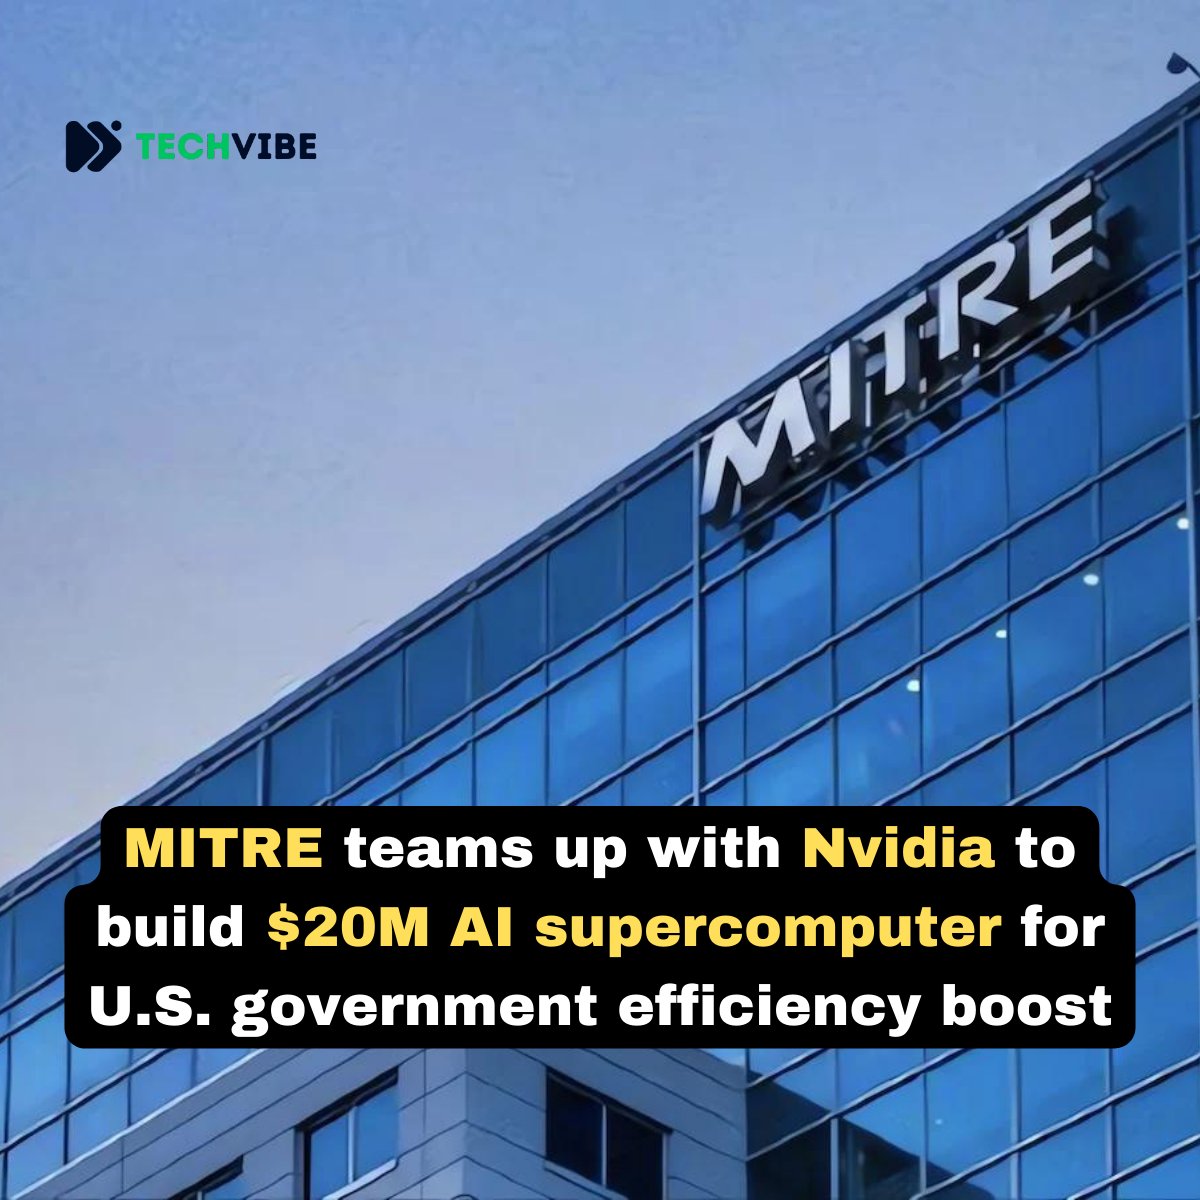 MITRE, a key supplier to the Pentagon and U.S. intelligence agencies, partners with Nvidia to construct a $20 million AI supercomputer aimed at enhancing efficiency across the U.S. federal government. more: t.ly/IAj7t #Mitre #Nvidia #US #AI